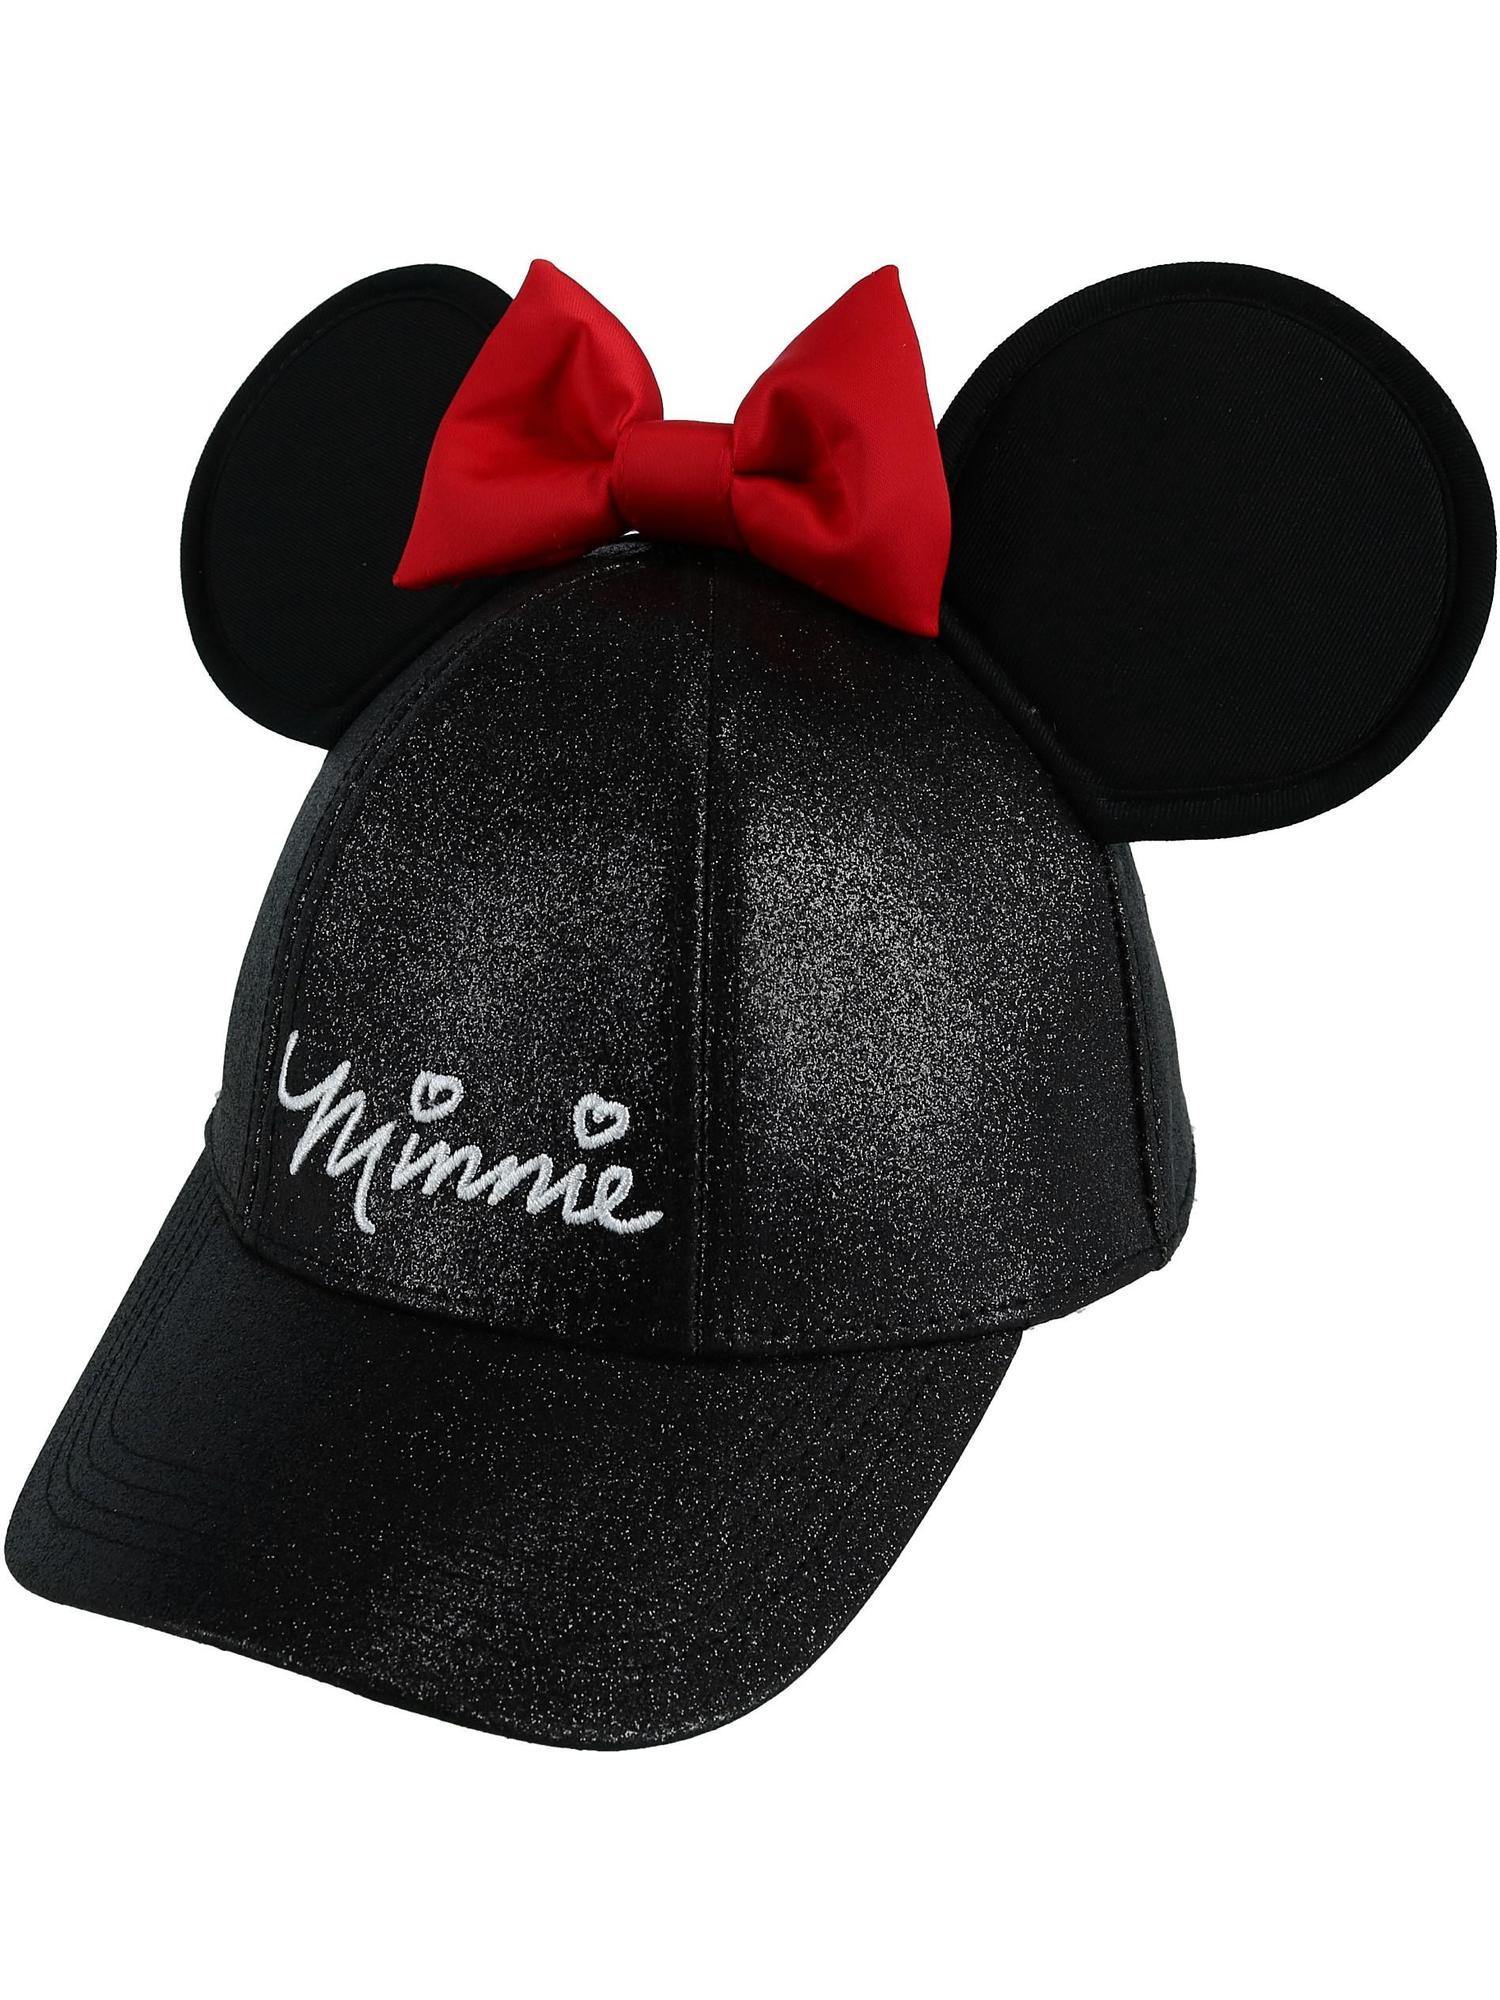 Disney Youth Minnie Glitter Ears Hat With Red Bow